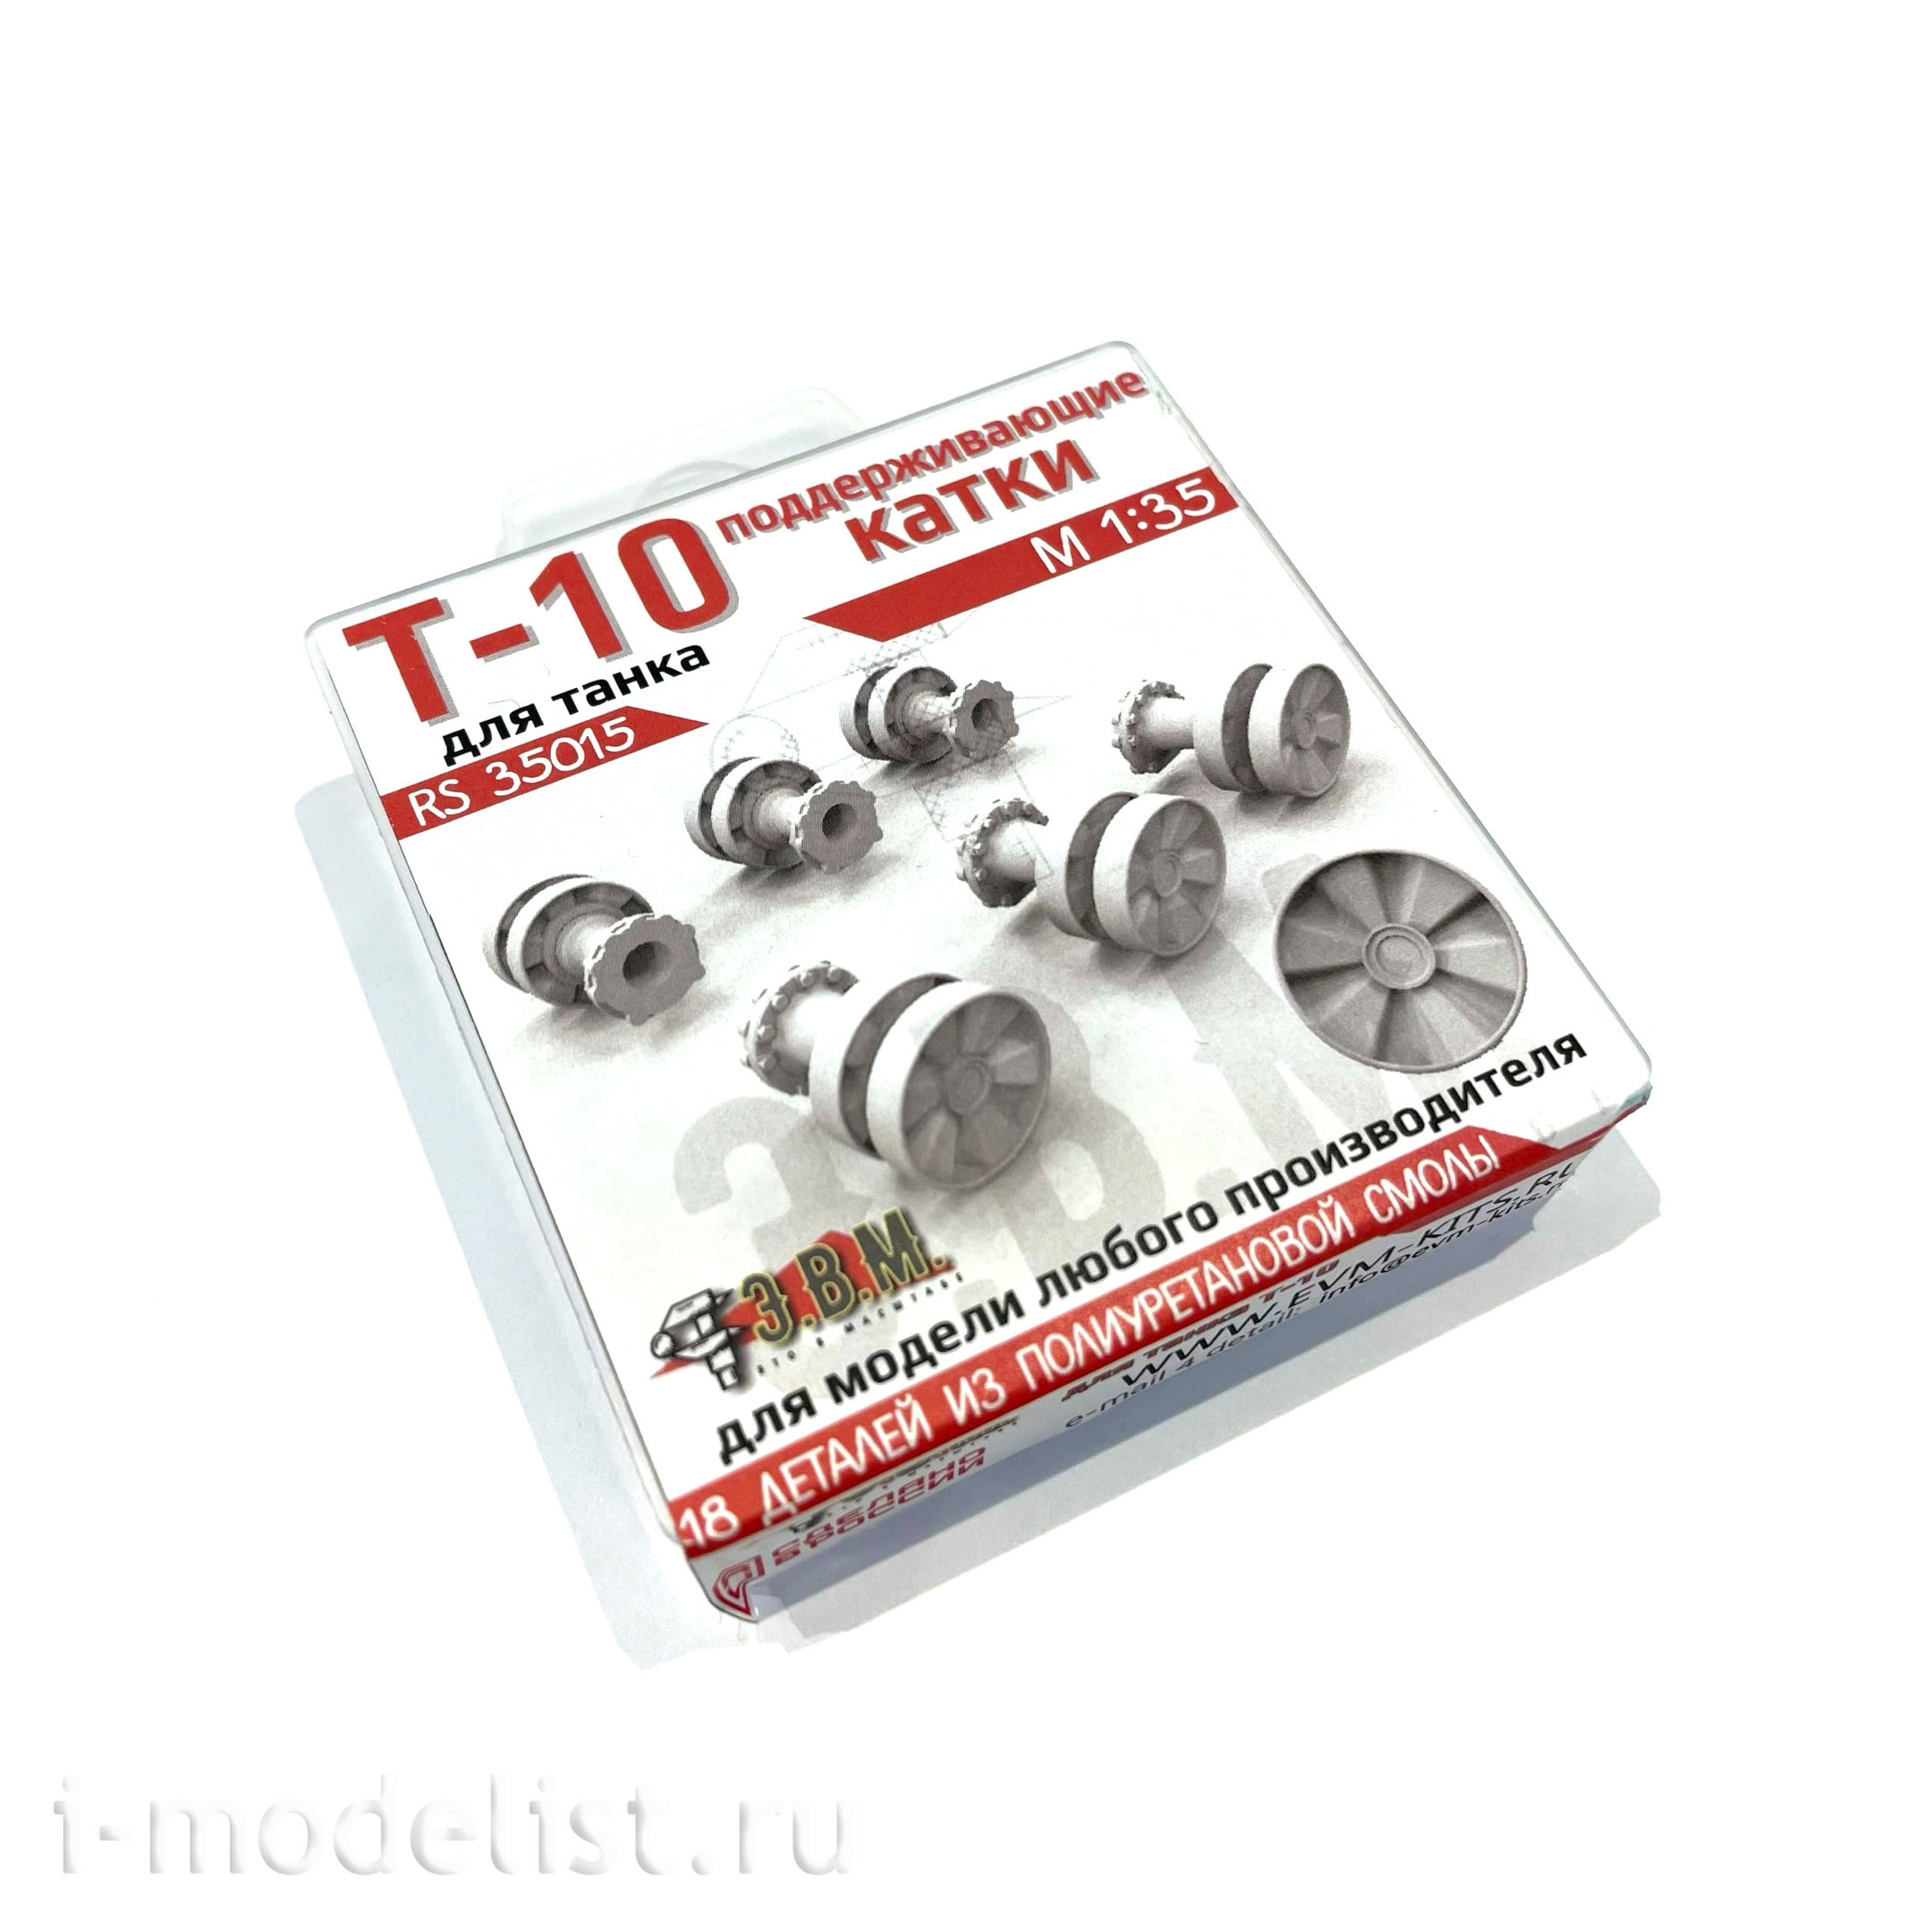 RS35015 E. V. M. 1/35 Support Rollers for T-10